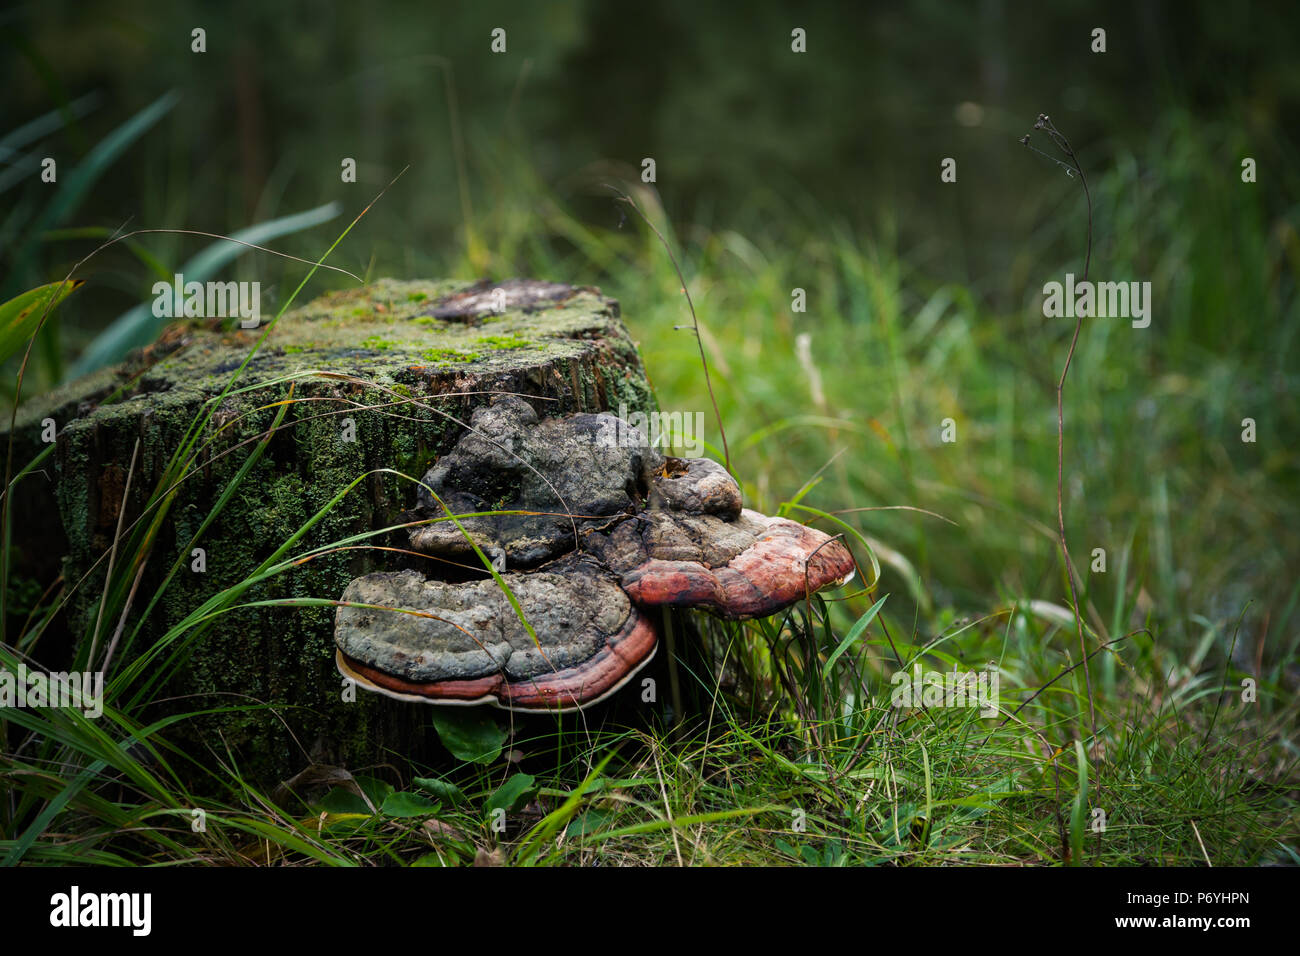 Decayed wood stump with two large polypores attached on it in green grass Stock Photo